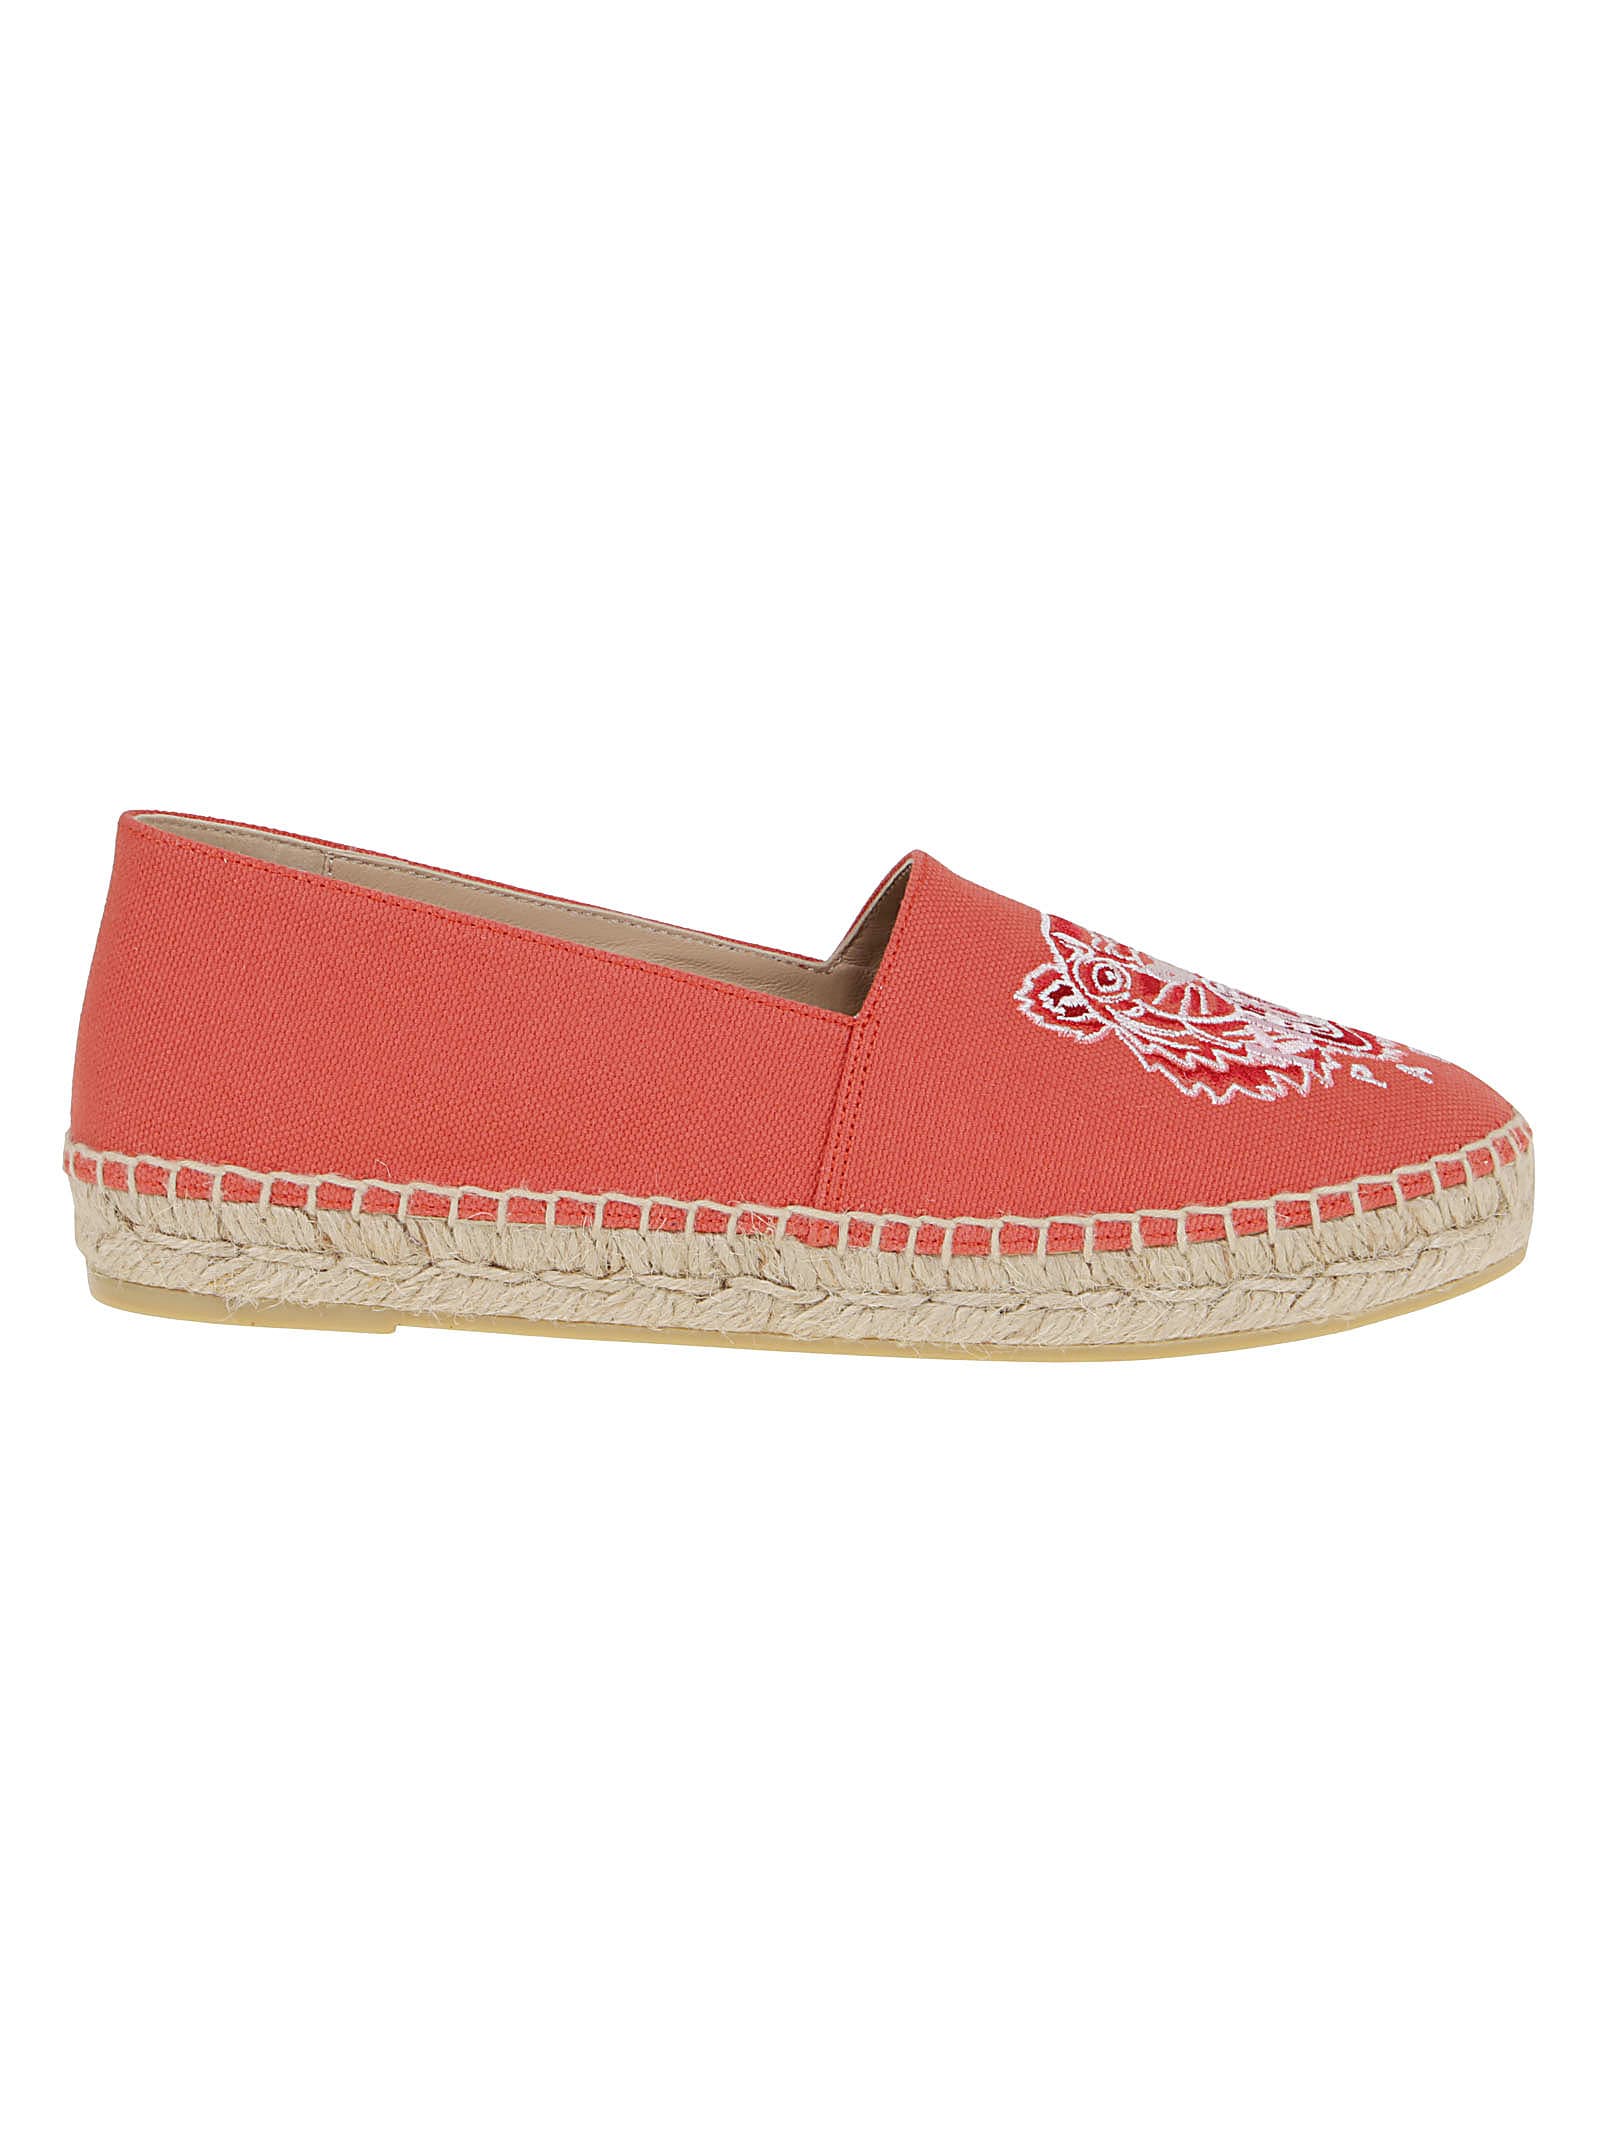 Buy Kenzo Espadrille Classic Tiger online, shop Kenzo shoes with free shipping